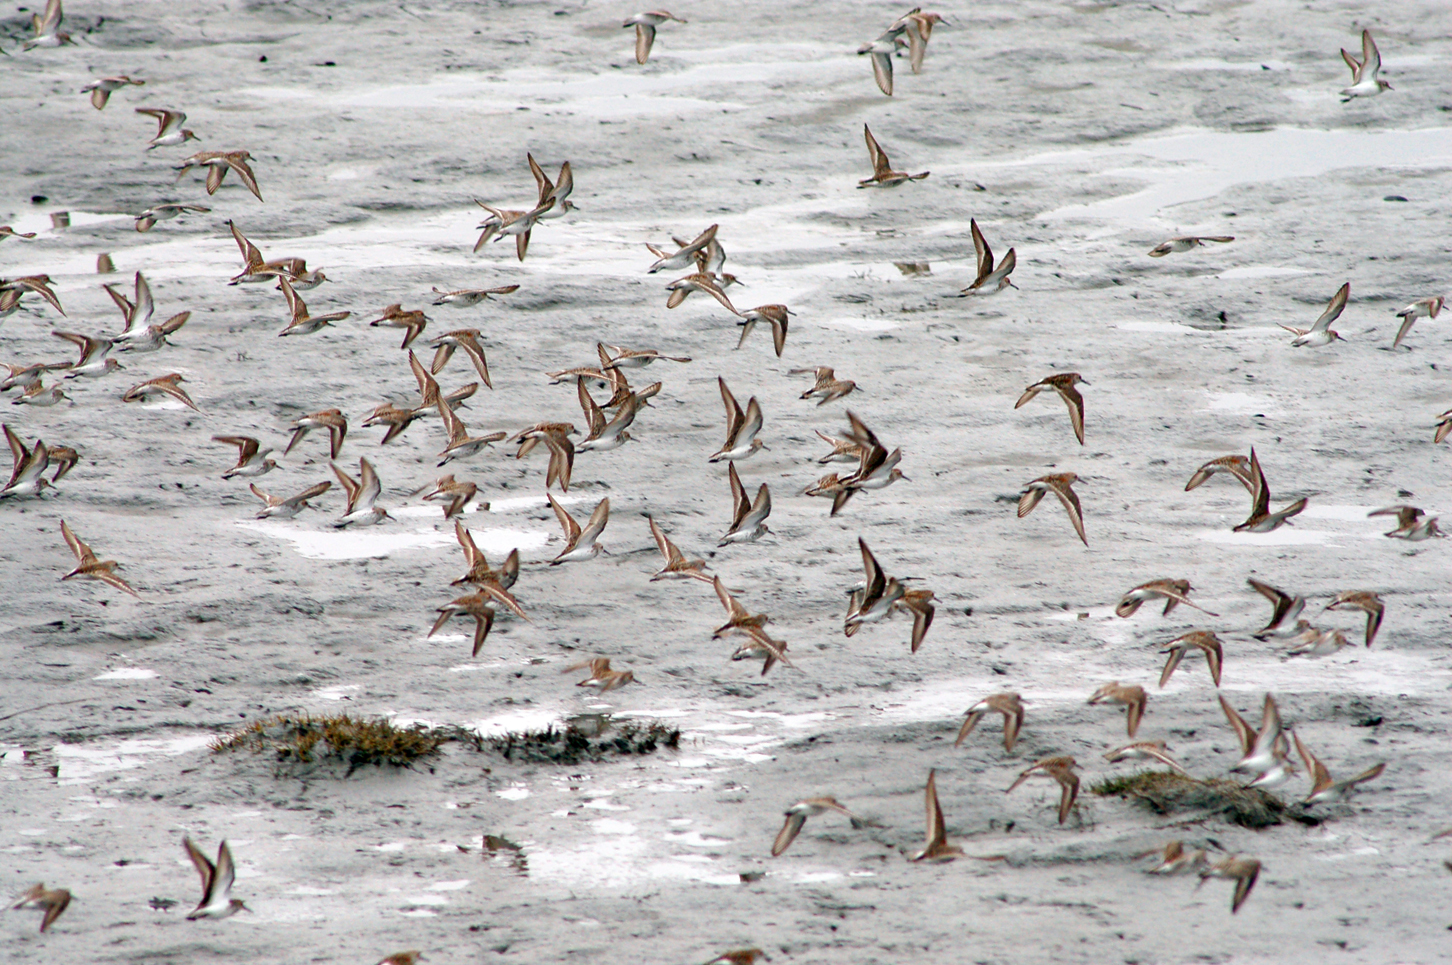 Dunlins and western sandpipers fly over Mud Bay last Saturday.-Photos by Michael Armstrong, Homer News